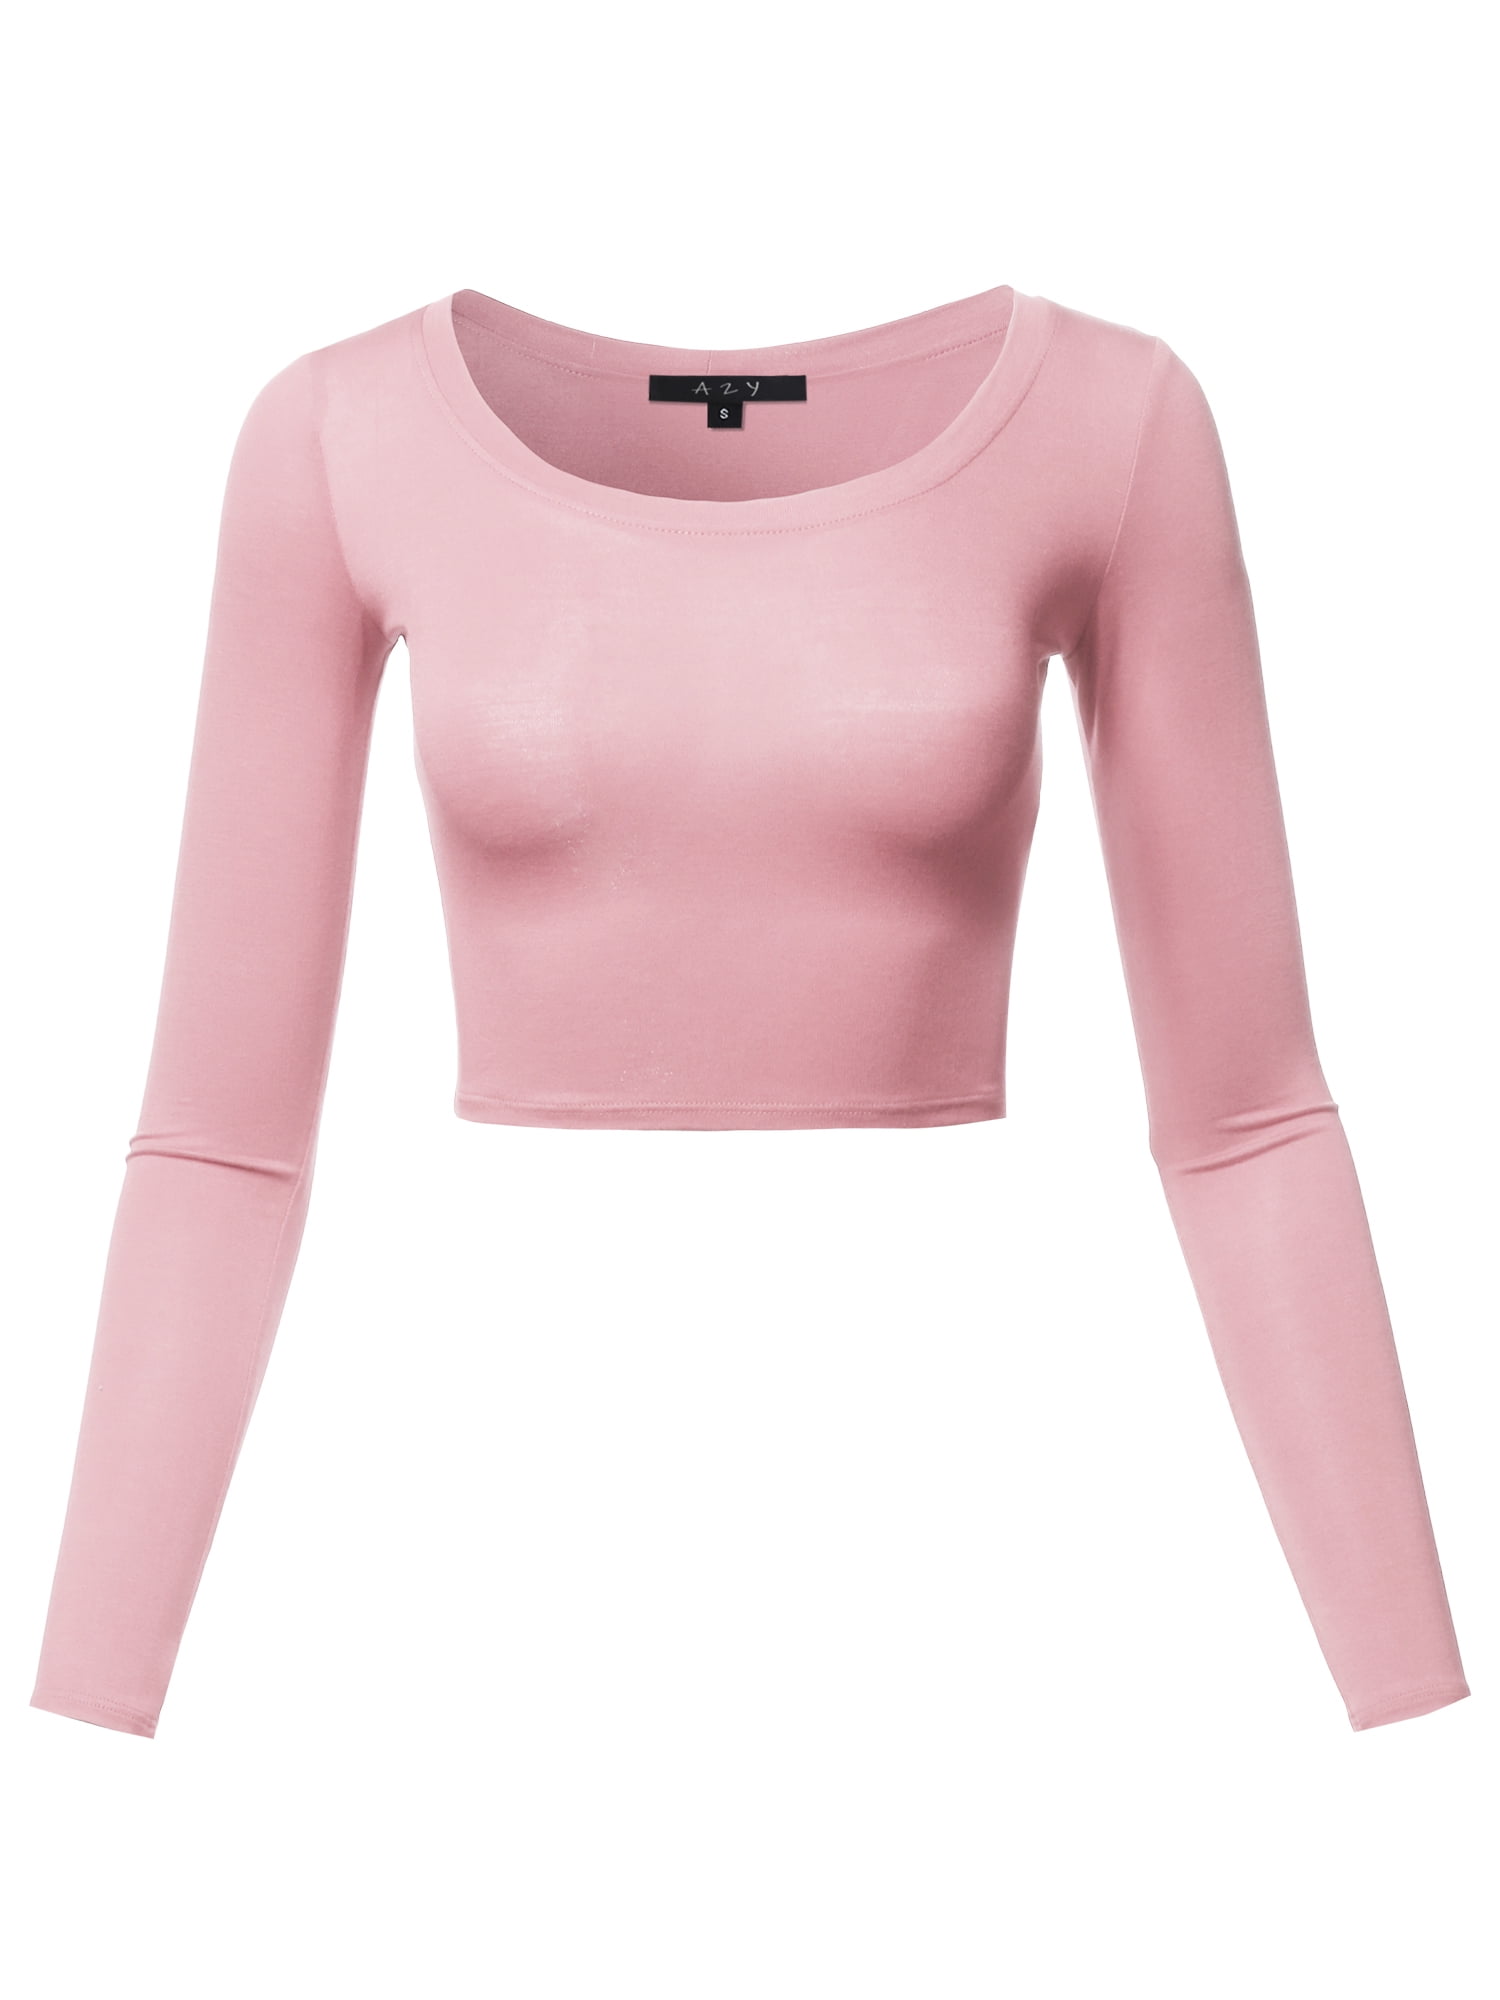 A2Y Women's Basic Solid Stretchable Scoop Neck Long Sleeve Crop Top ...